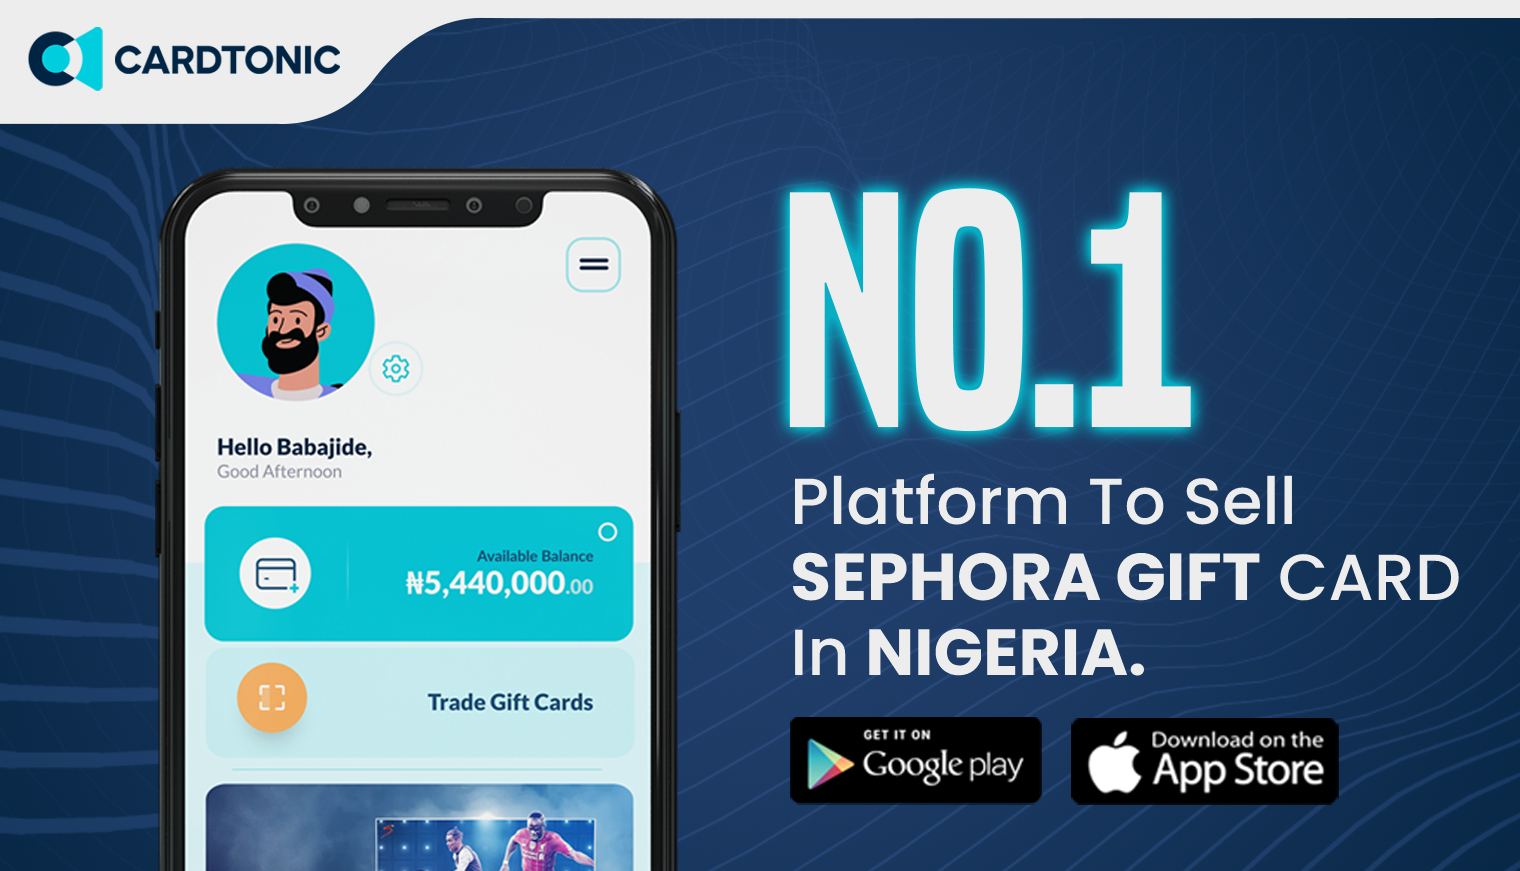 SELL SEPHORA GIFT CARD IN NIGERIA